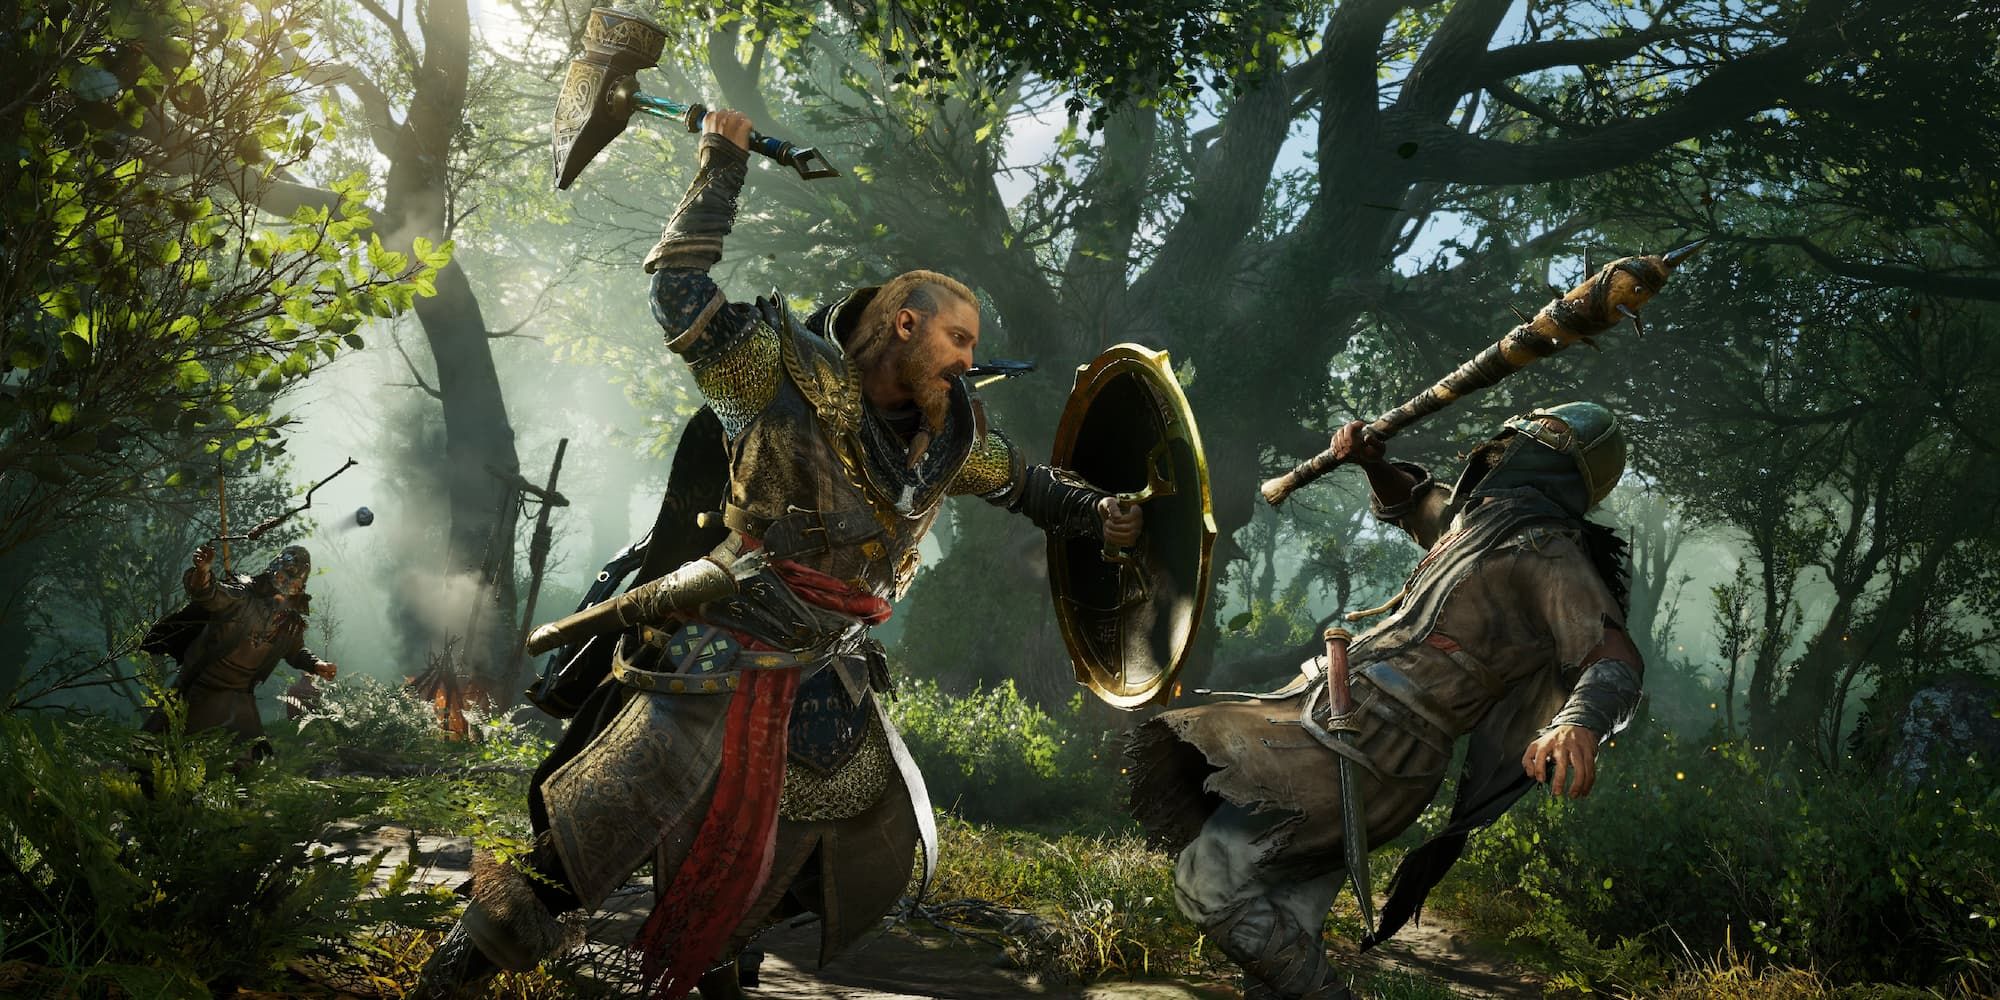 The assassin hits an enemy with an ax in the forest in Assassin's Creed Valhalla.